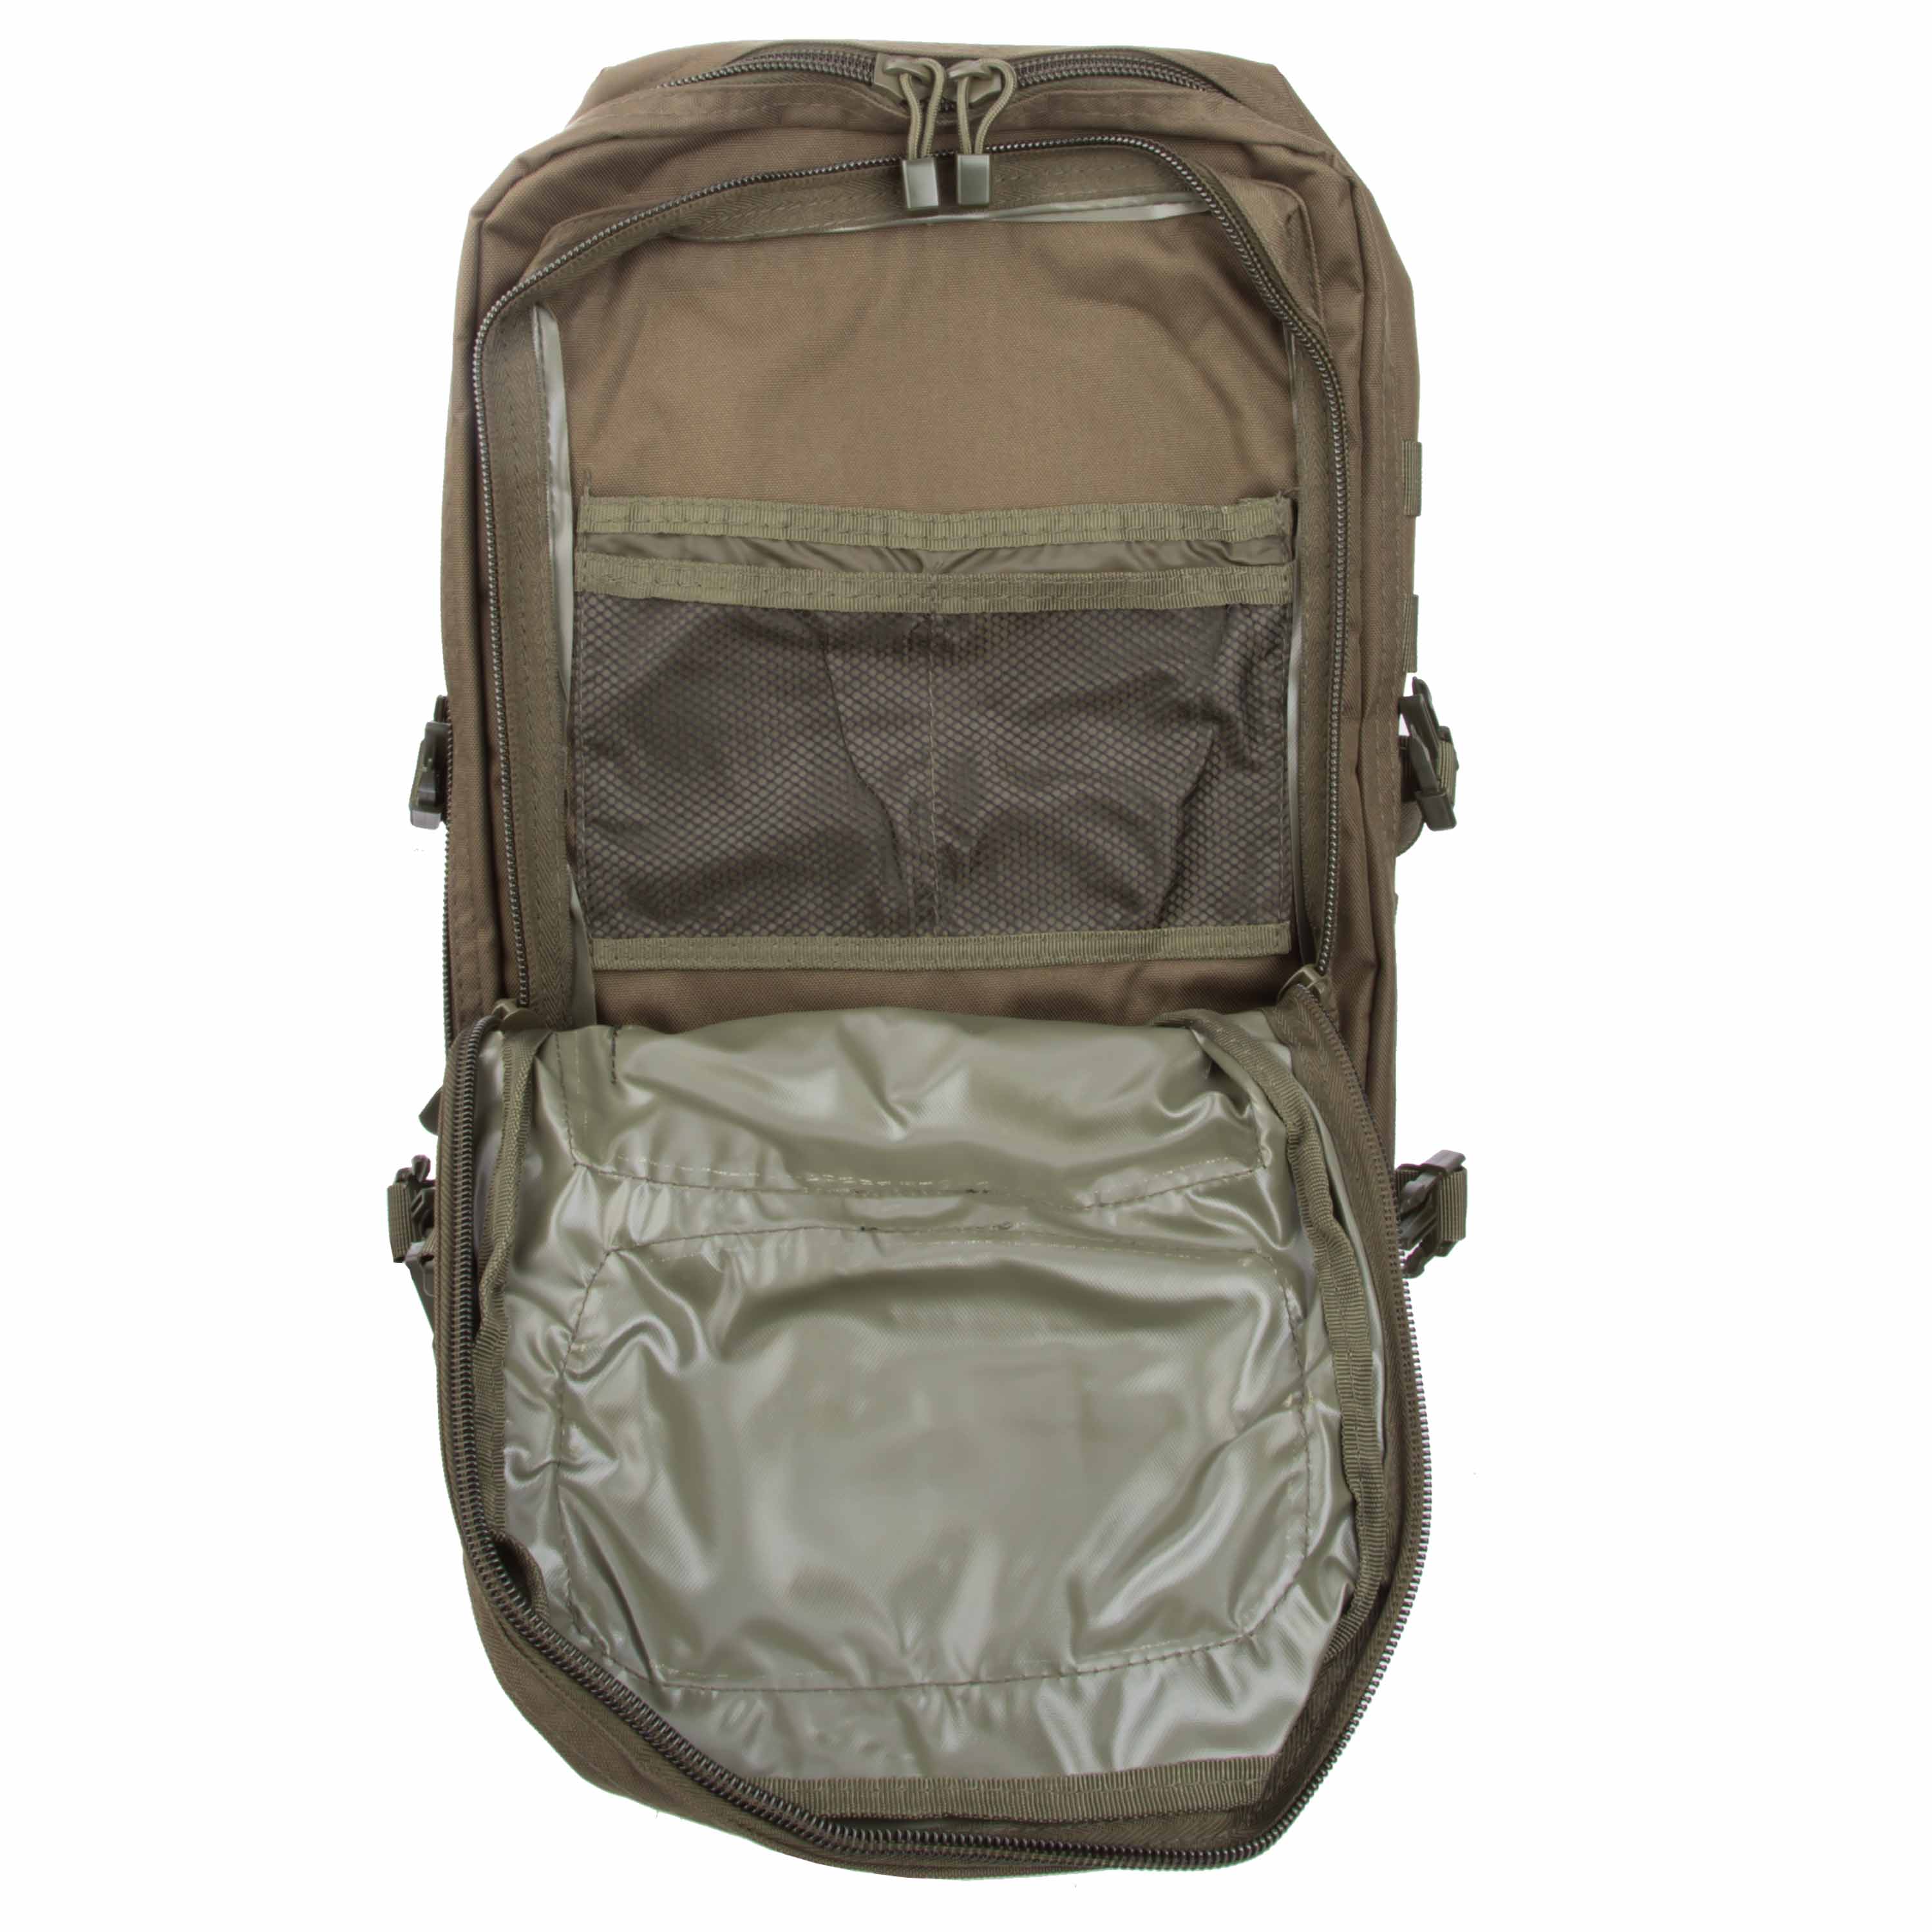 Backpack Mil-tec Assault SM olive green, 20L Backpack Mil-tec Assault SM  olive green, 20L [03-0450271] :  - Fishing, backpack,  outdoors, flashlight, tents, wobblers, knives, axes, saw, machete, rapala,  storm